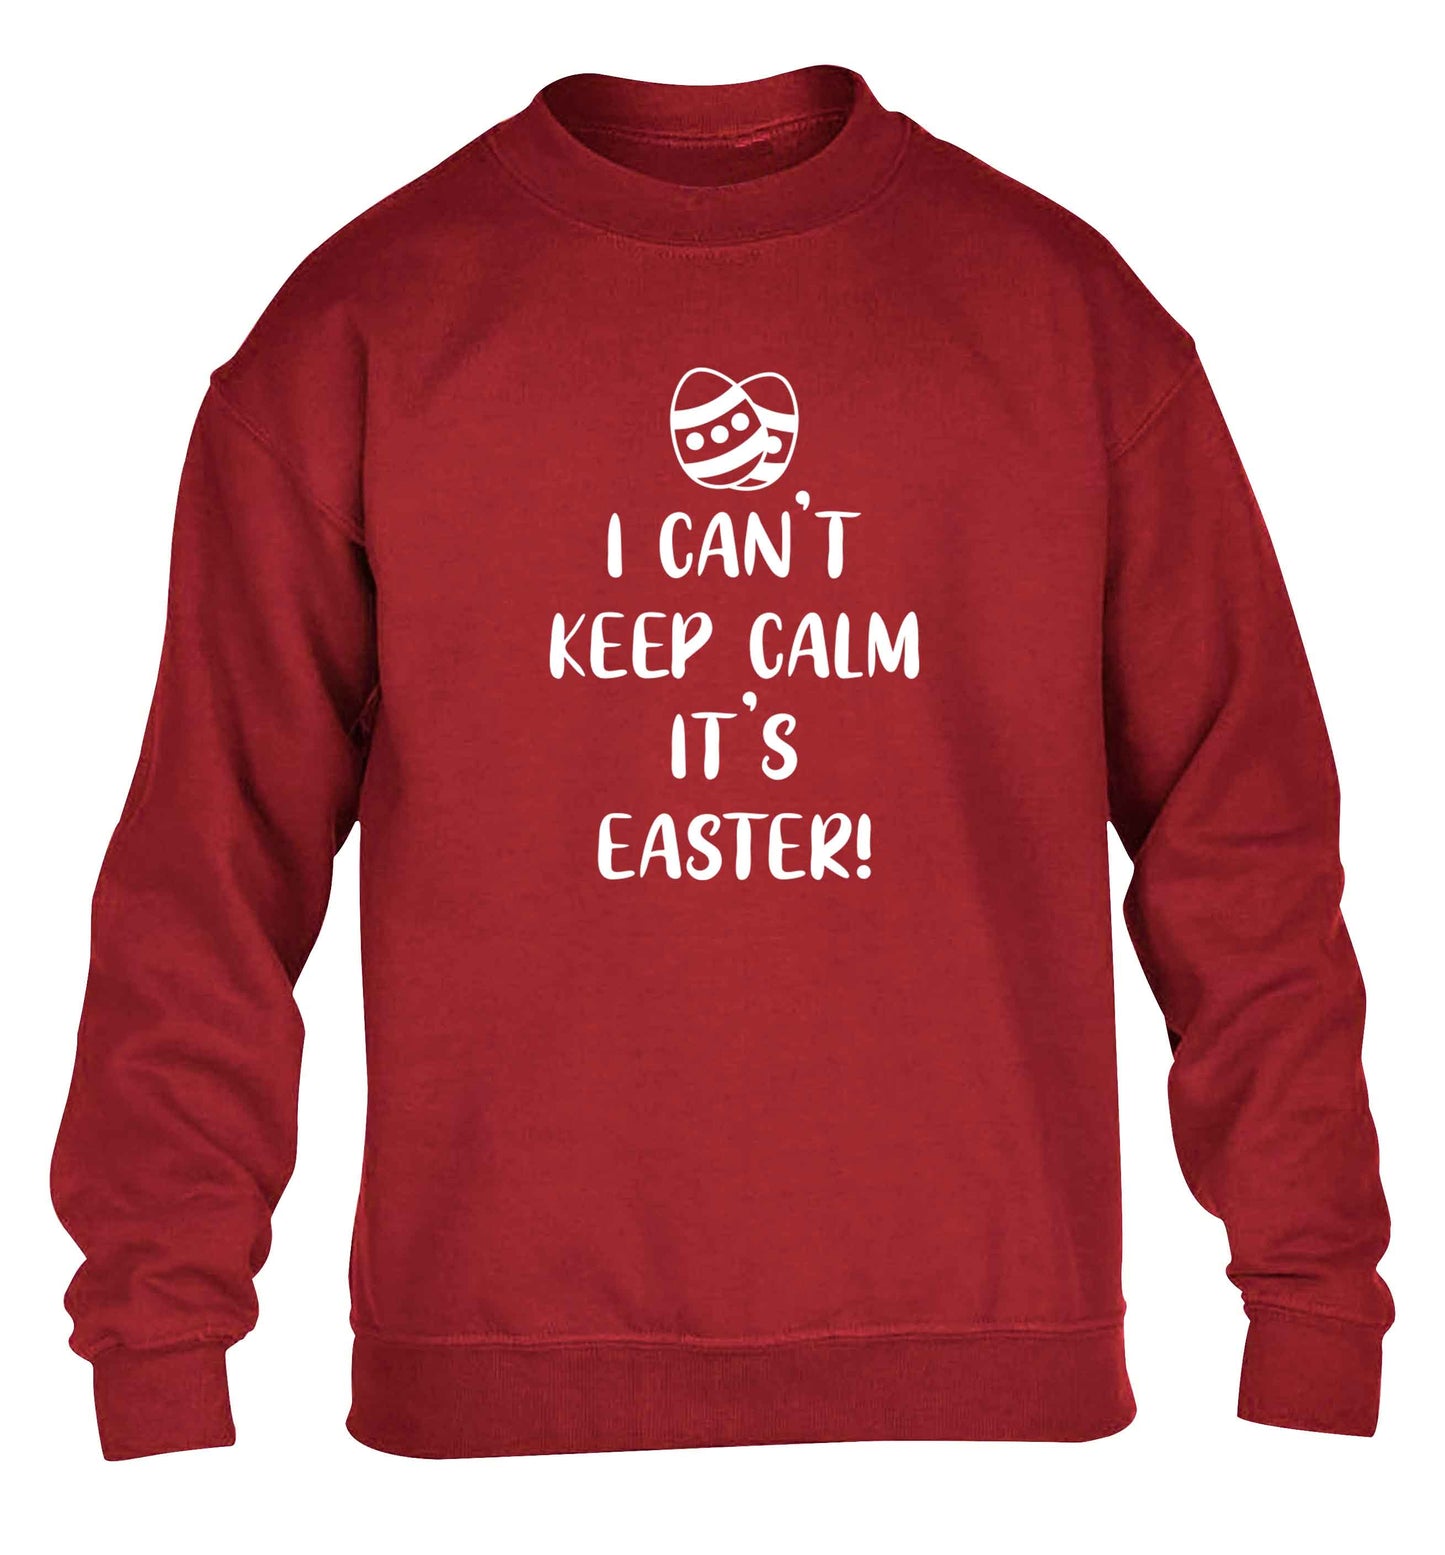 I can't keep calm it's Easter children's grey sweater 12-13 Years